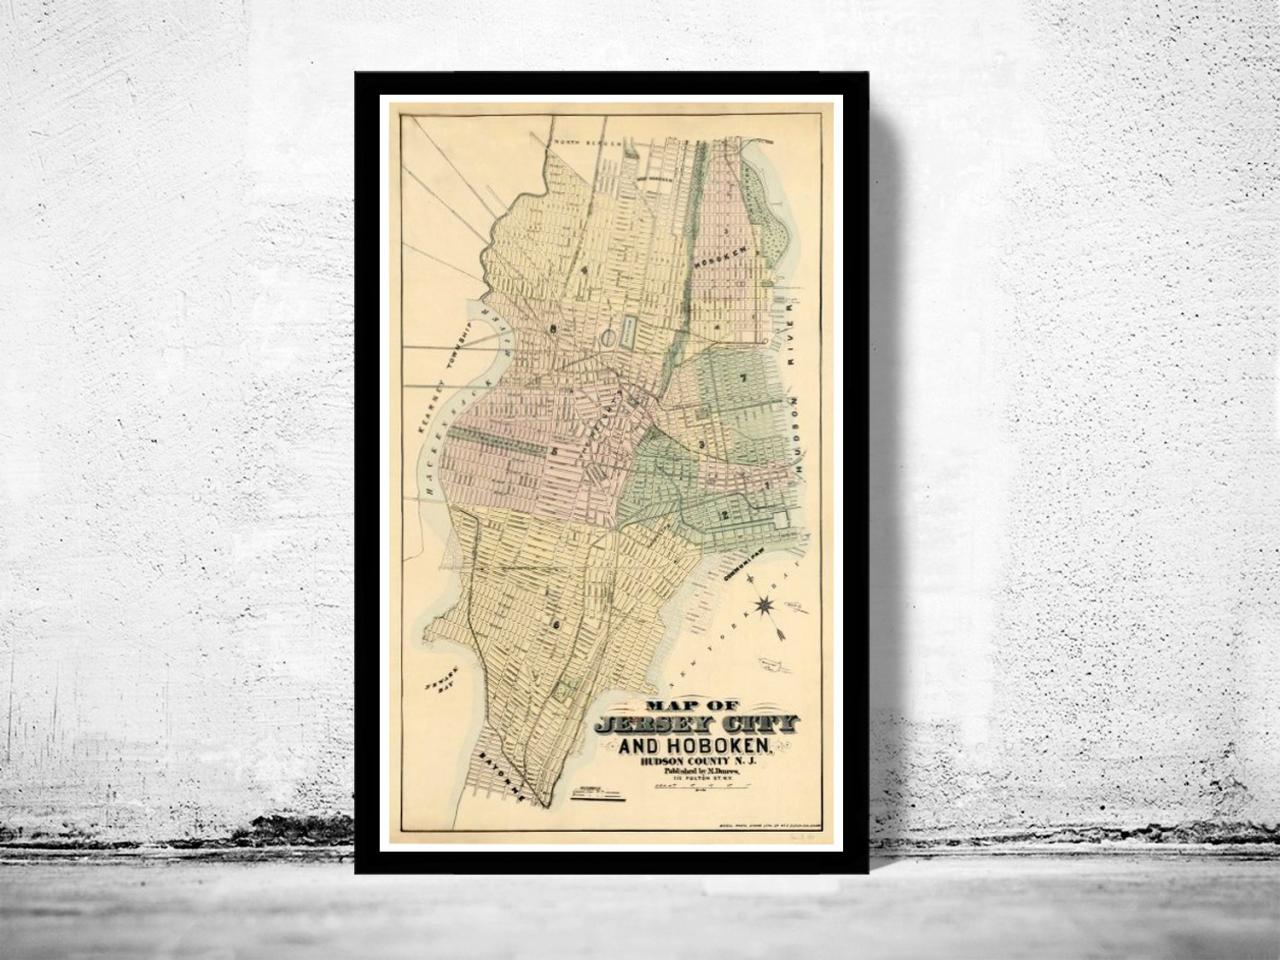 Old Map Of Jersey City And Hoboken , Hudson County 1882